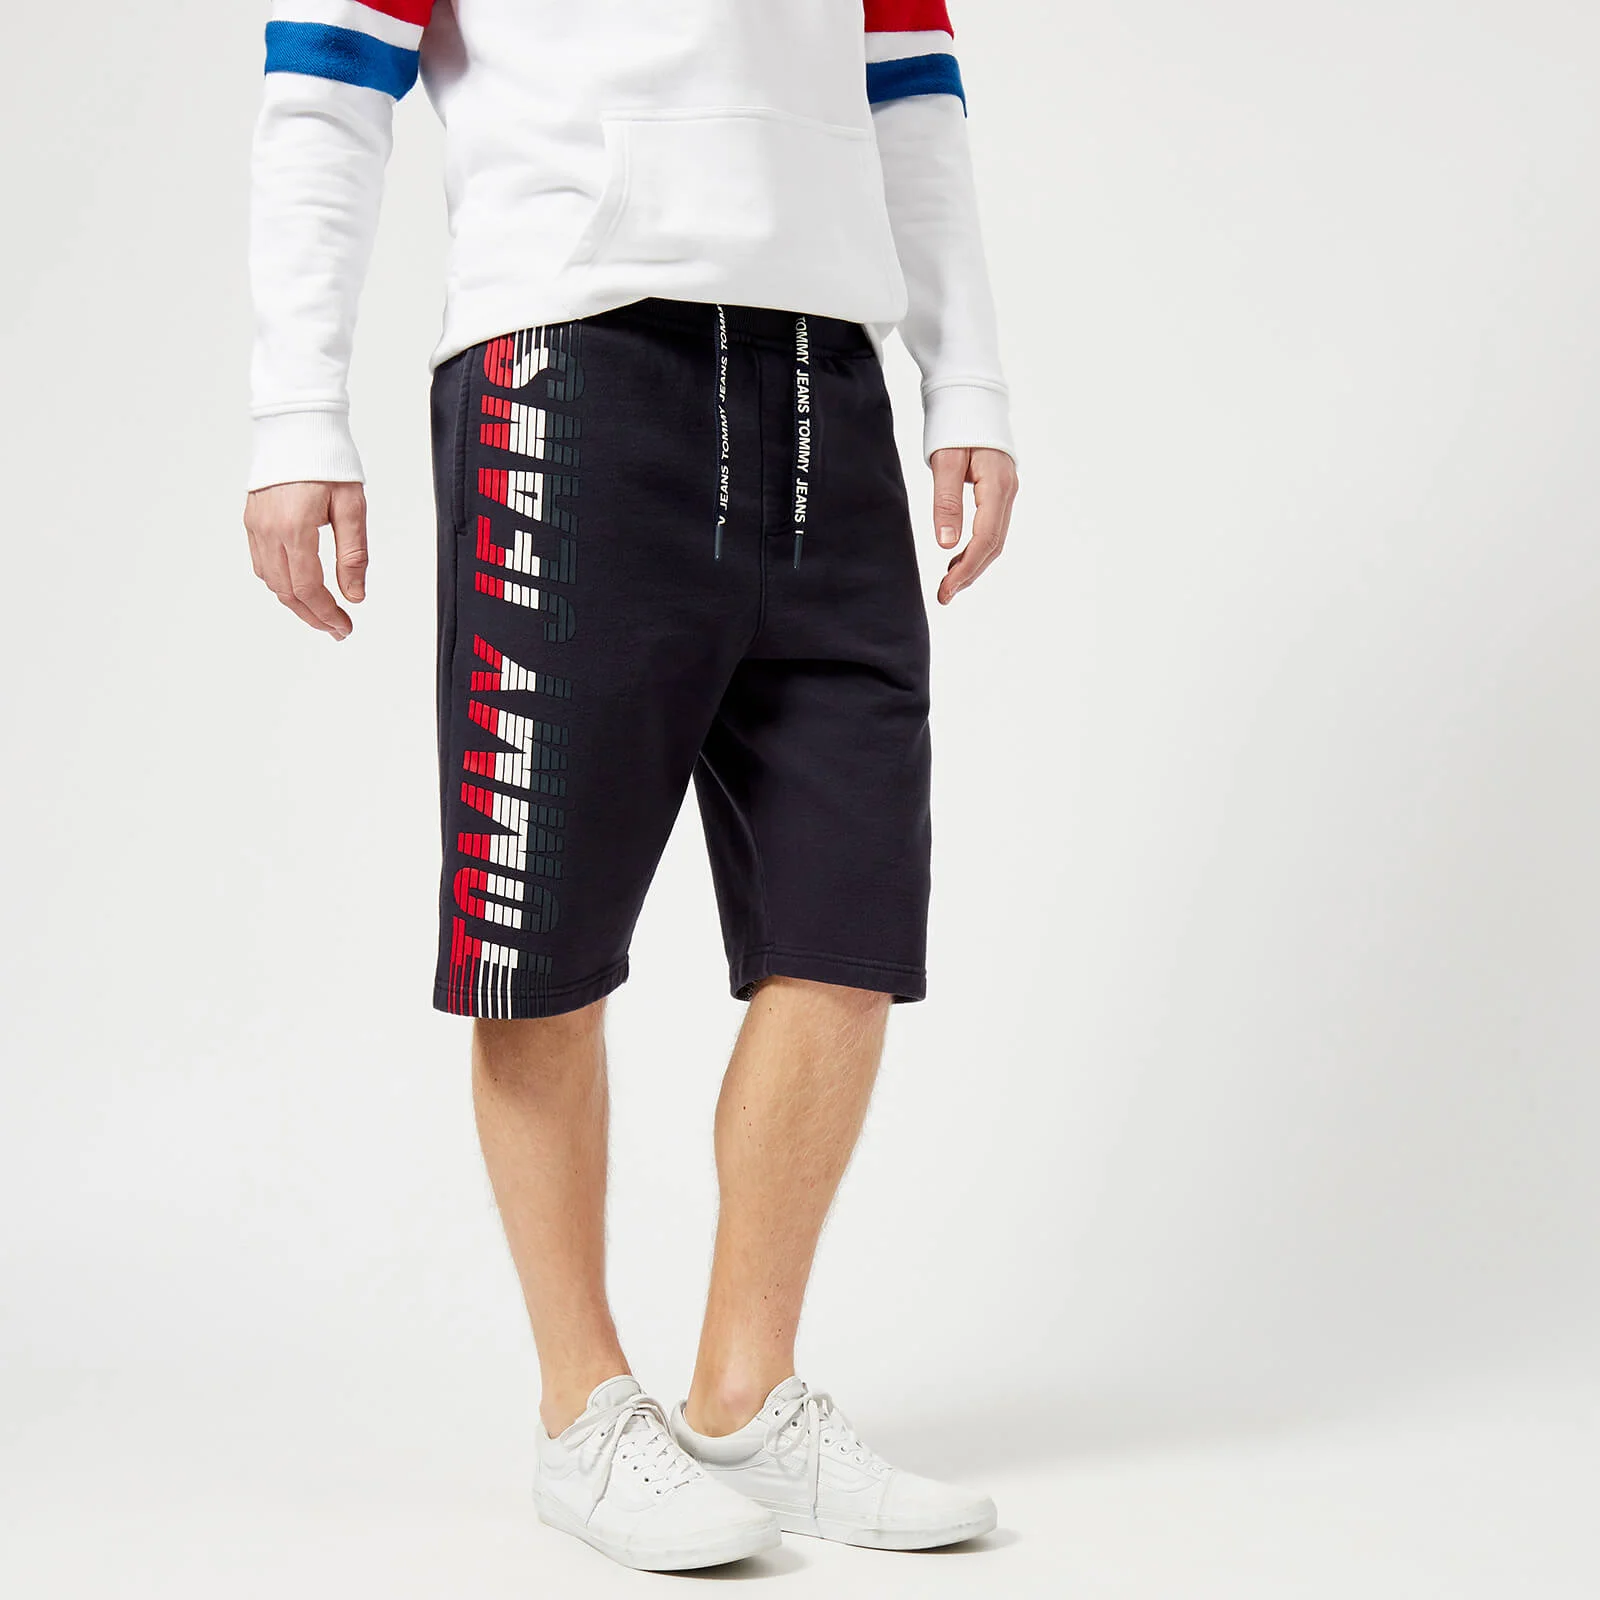 Tommy Jeans Men's Graphic Basketball Shorts - Black Iris Image 1